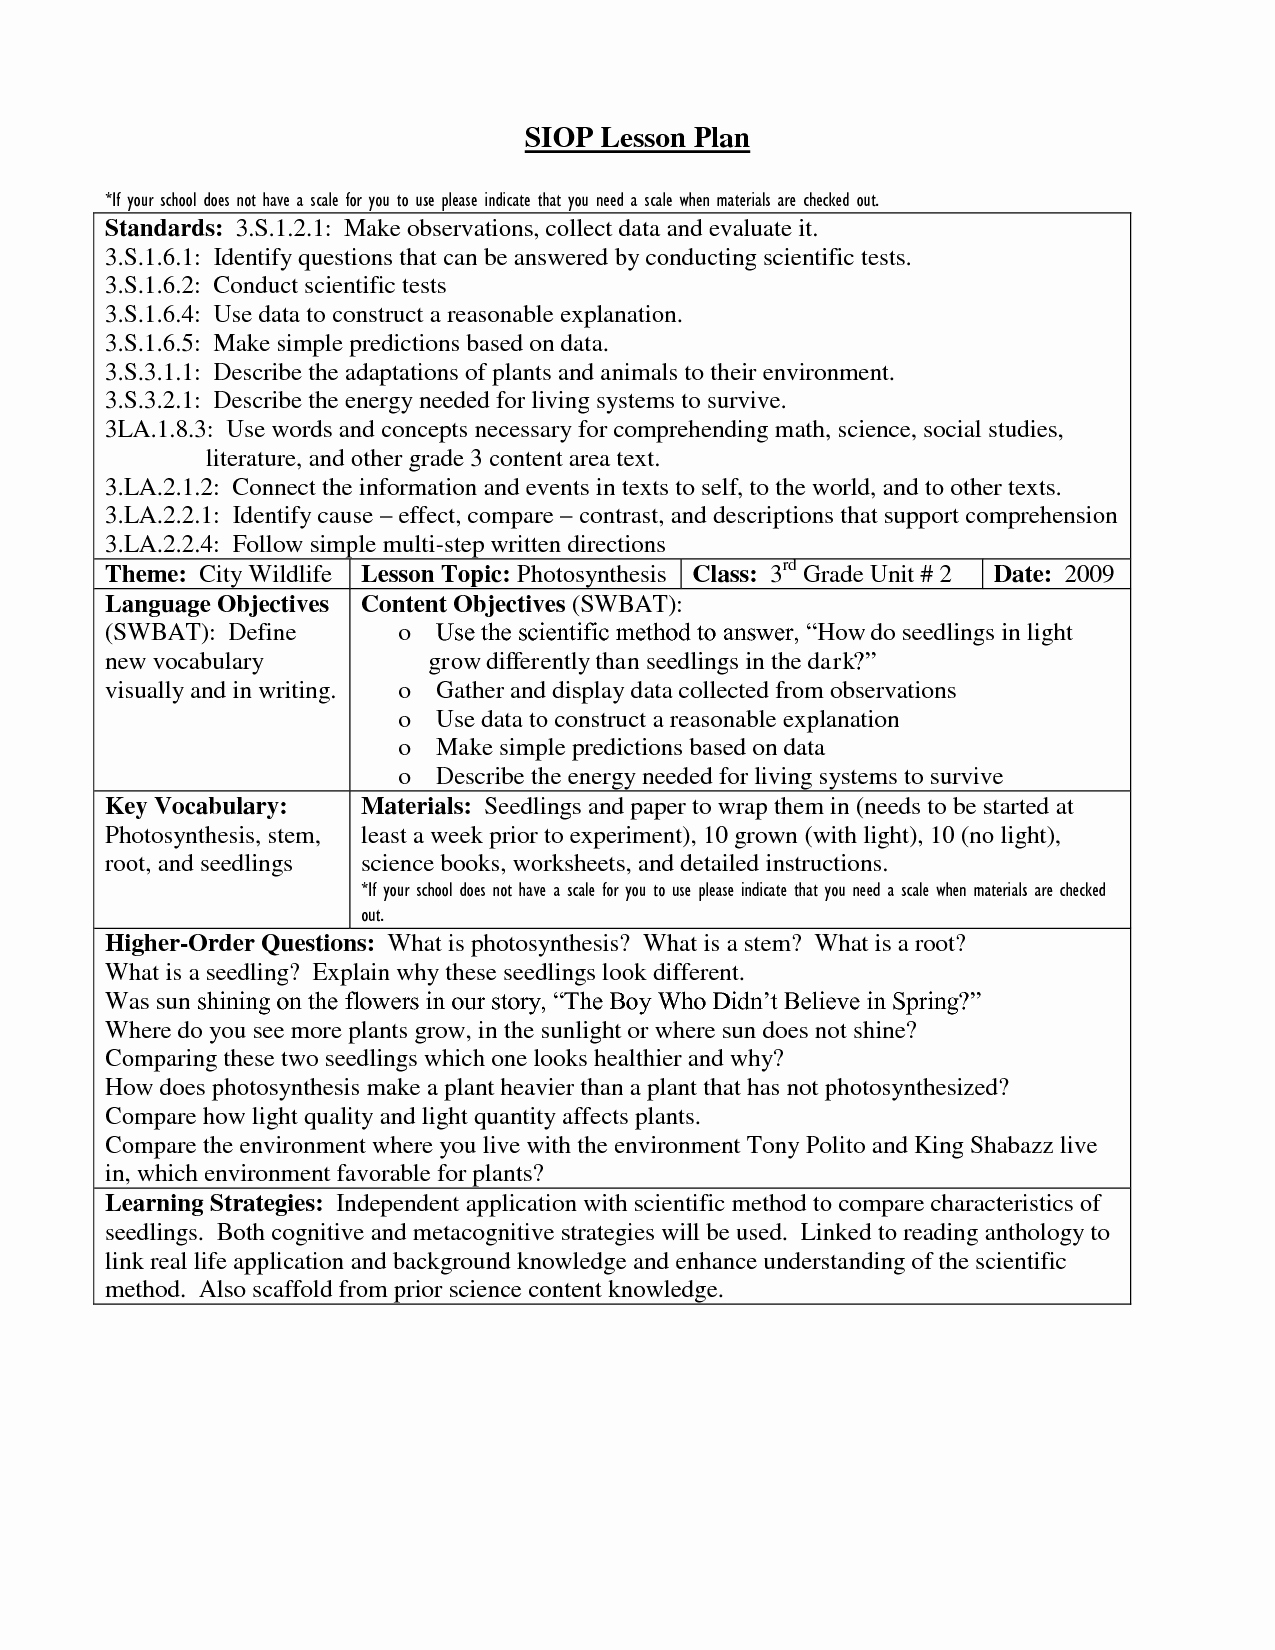 Siop Lesson Plan Template Best Of 16 Awesome Siop Lesson Plan Template 2 Example